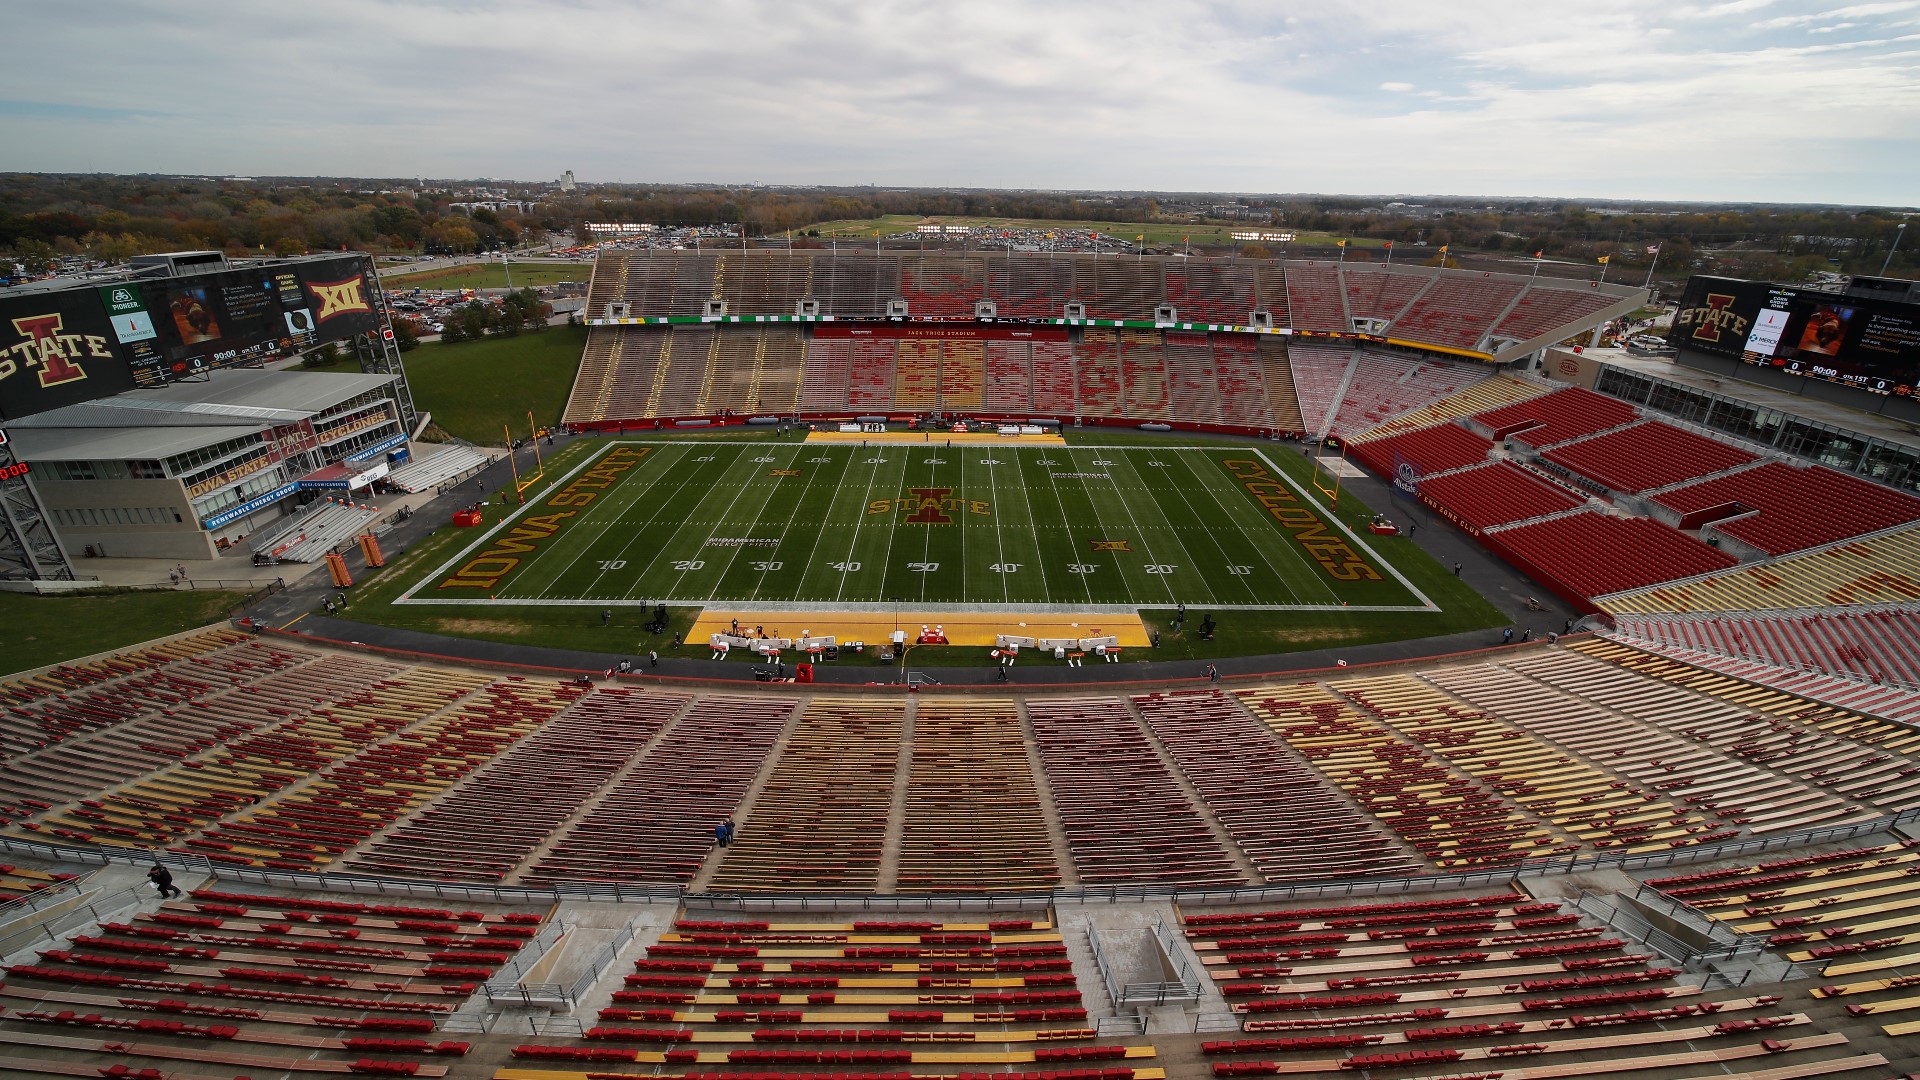 Iowa State fans are no strangers to lightning strikes during a game. So how can you stay safe if that happens again?